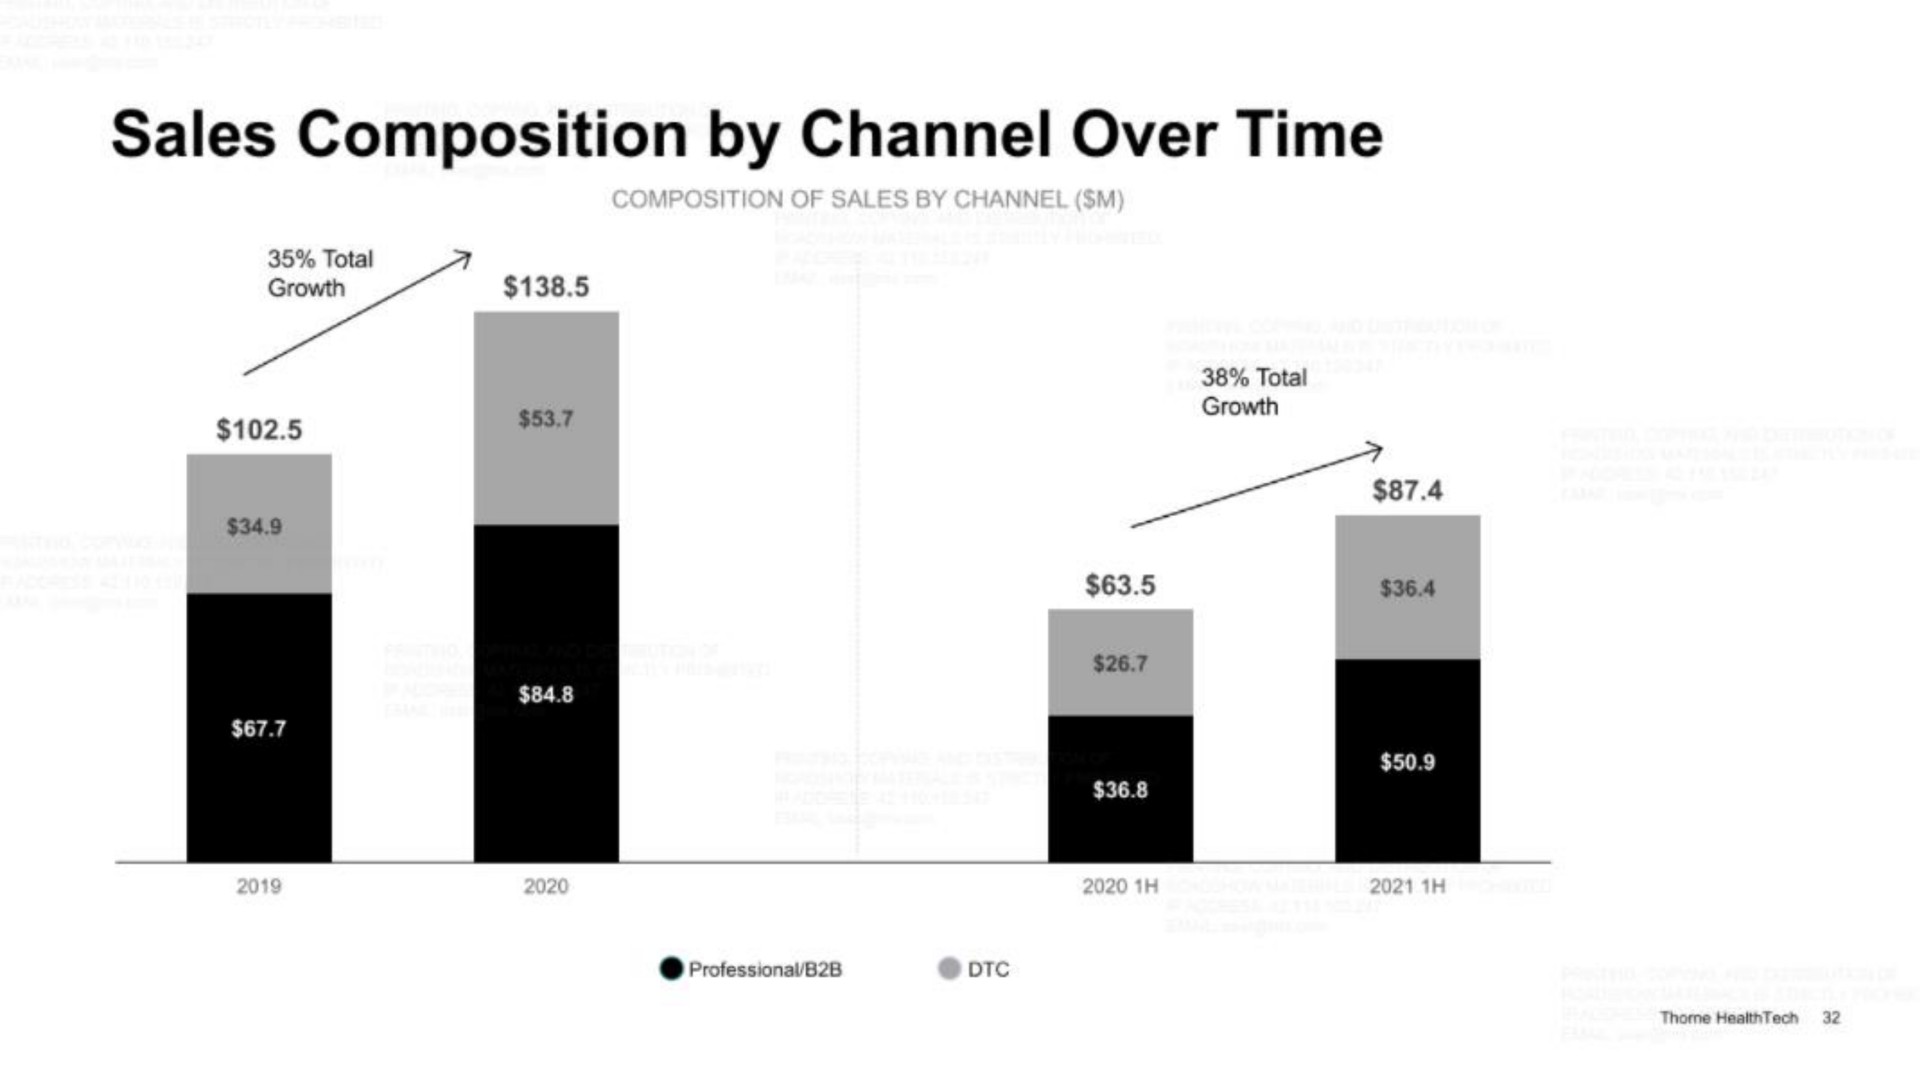 sales composition by channel over time | Thorne HealthTech